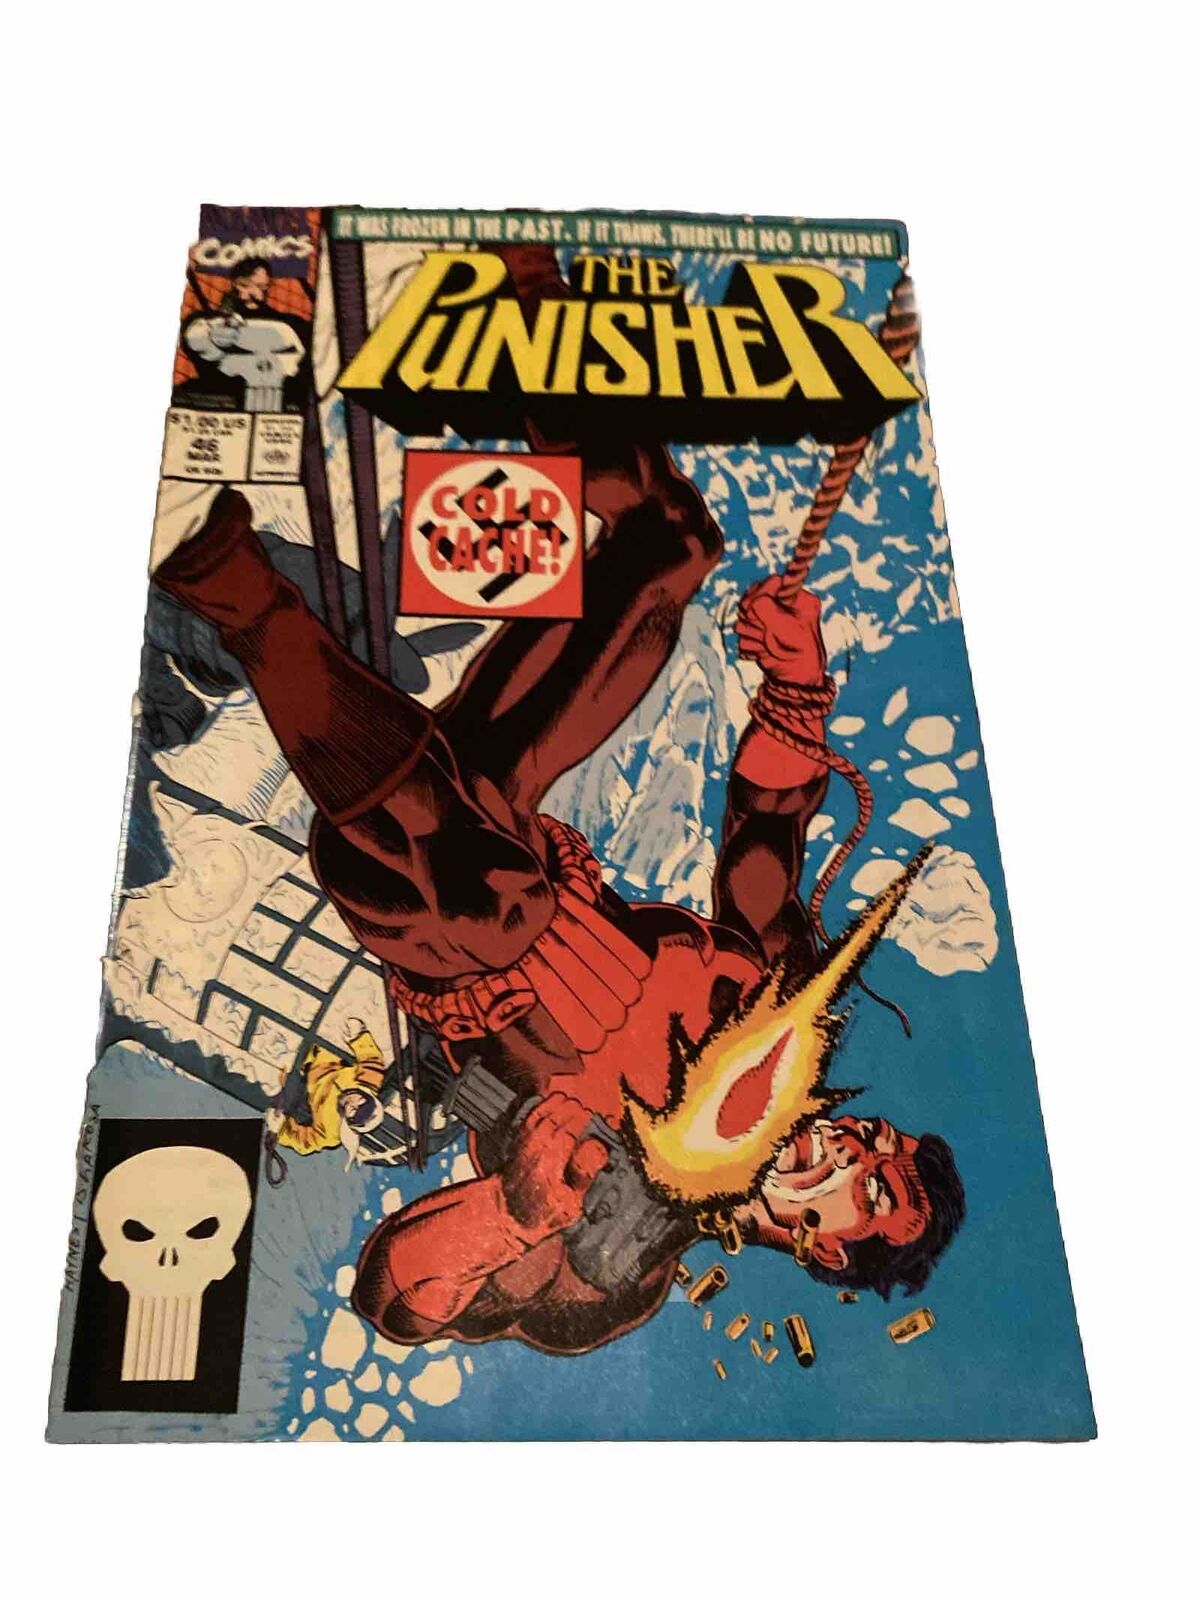 The punisher Cold, Cache, 46 March old comic book